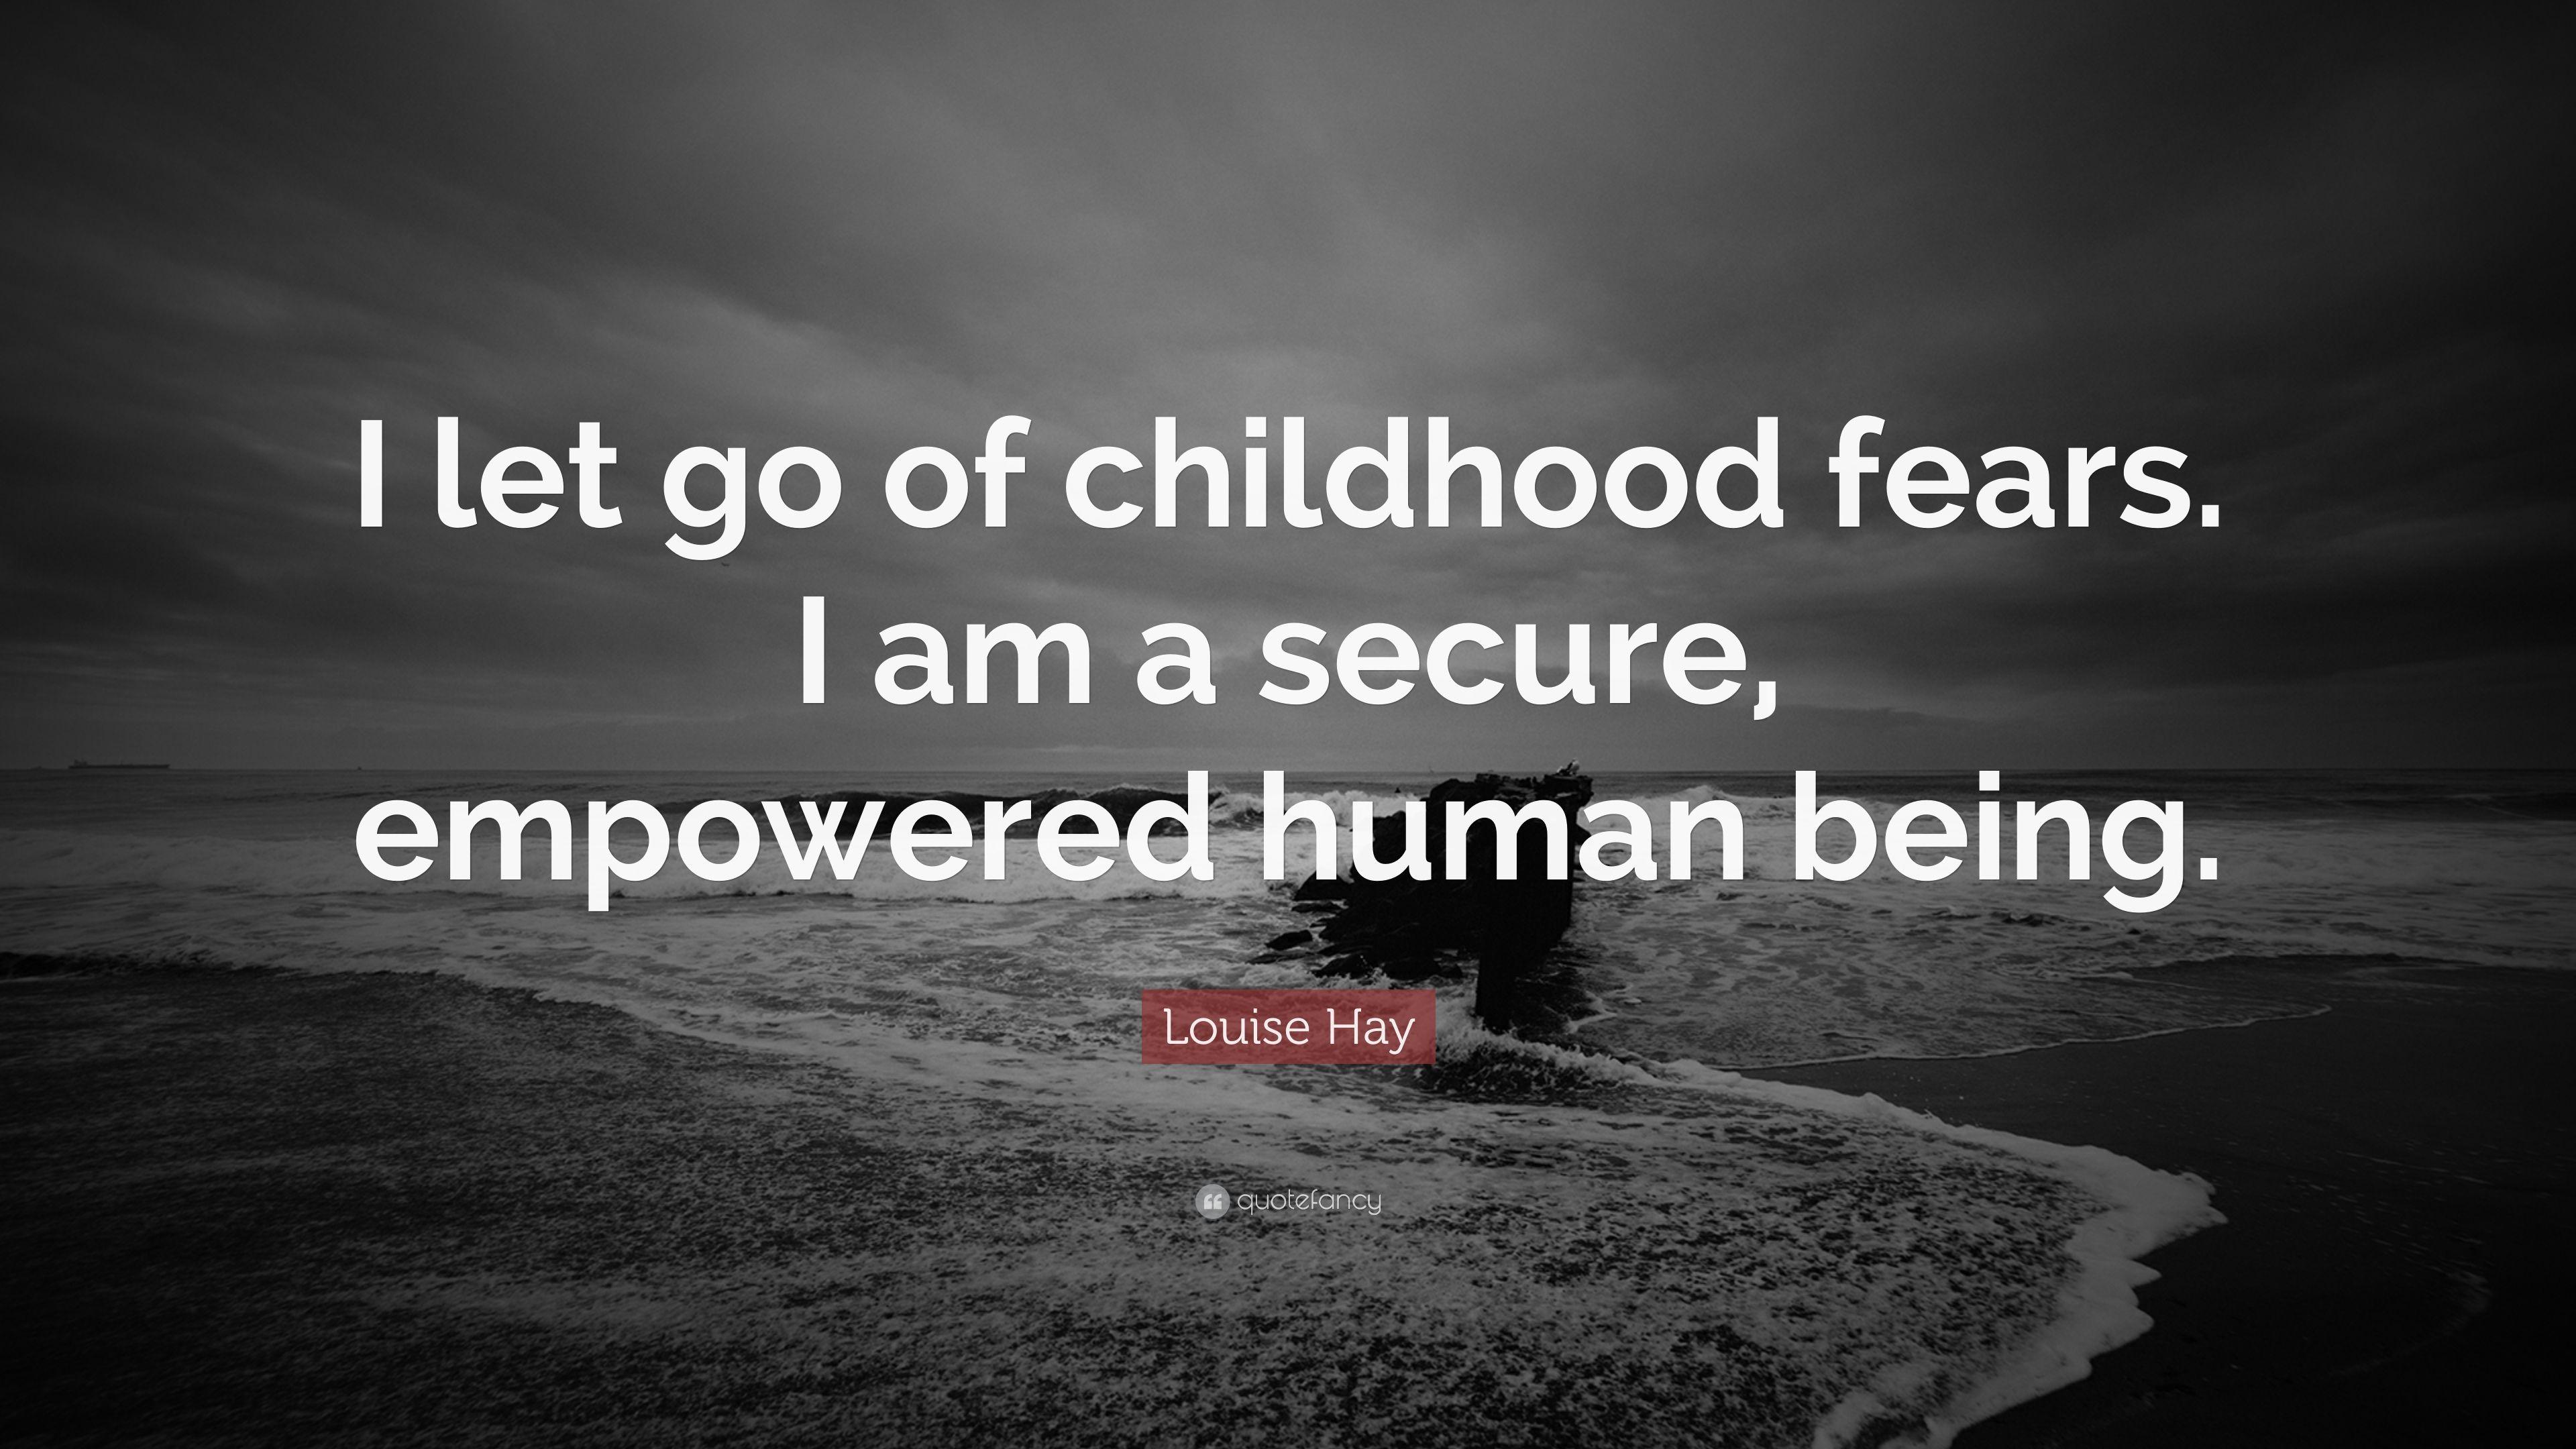 Louise Hay Quote: “I let go of childhood fears. I am a secure